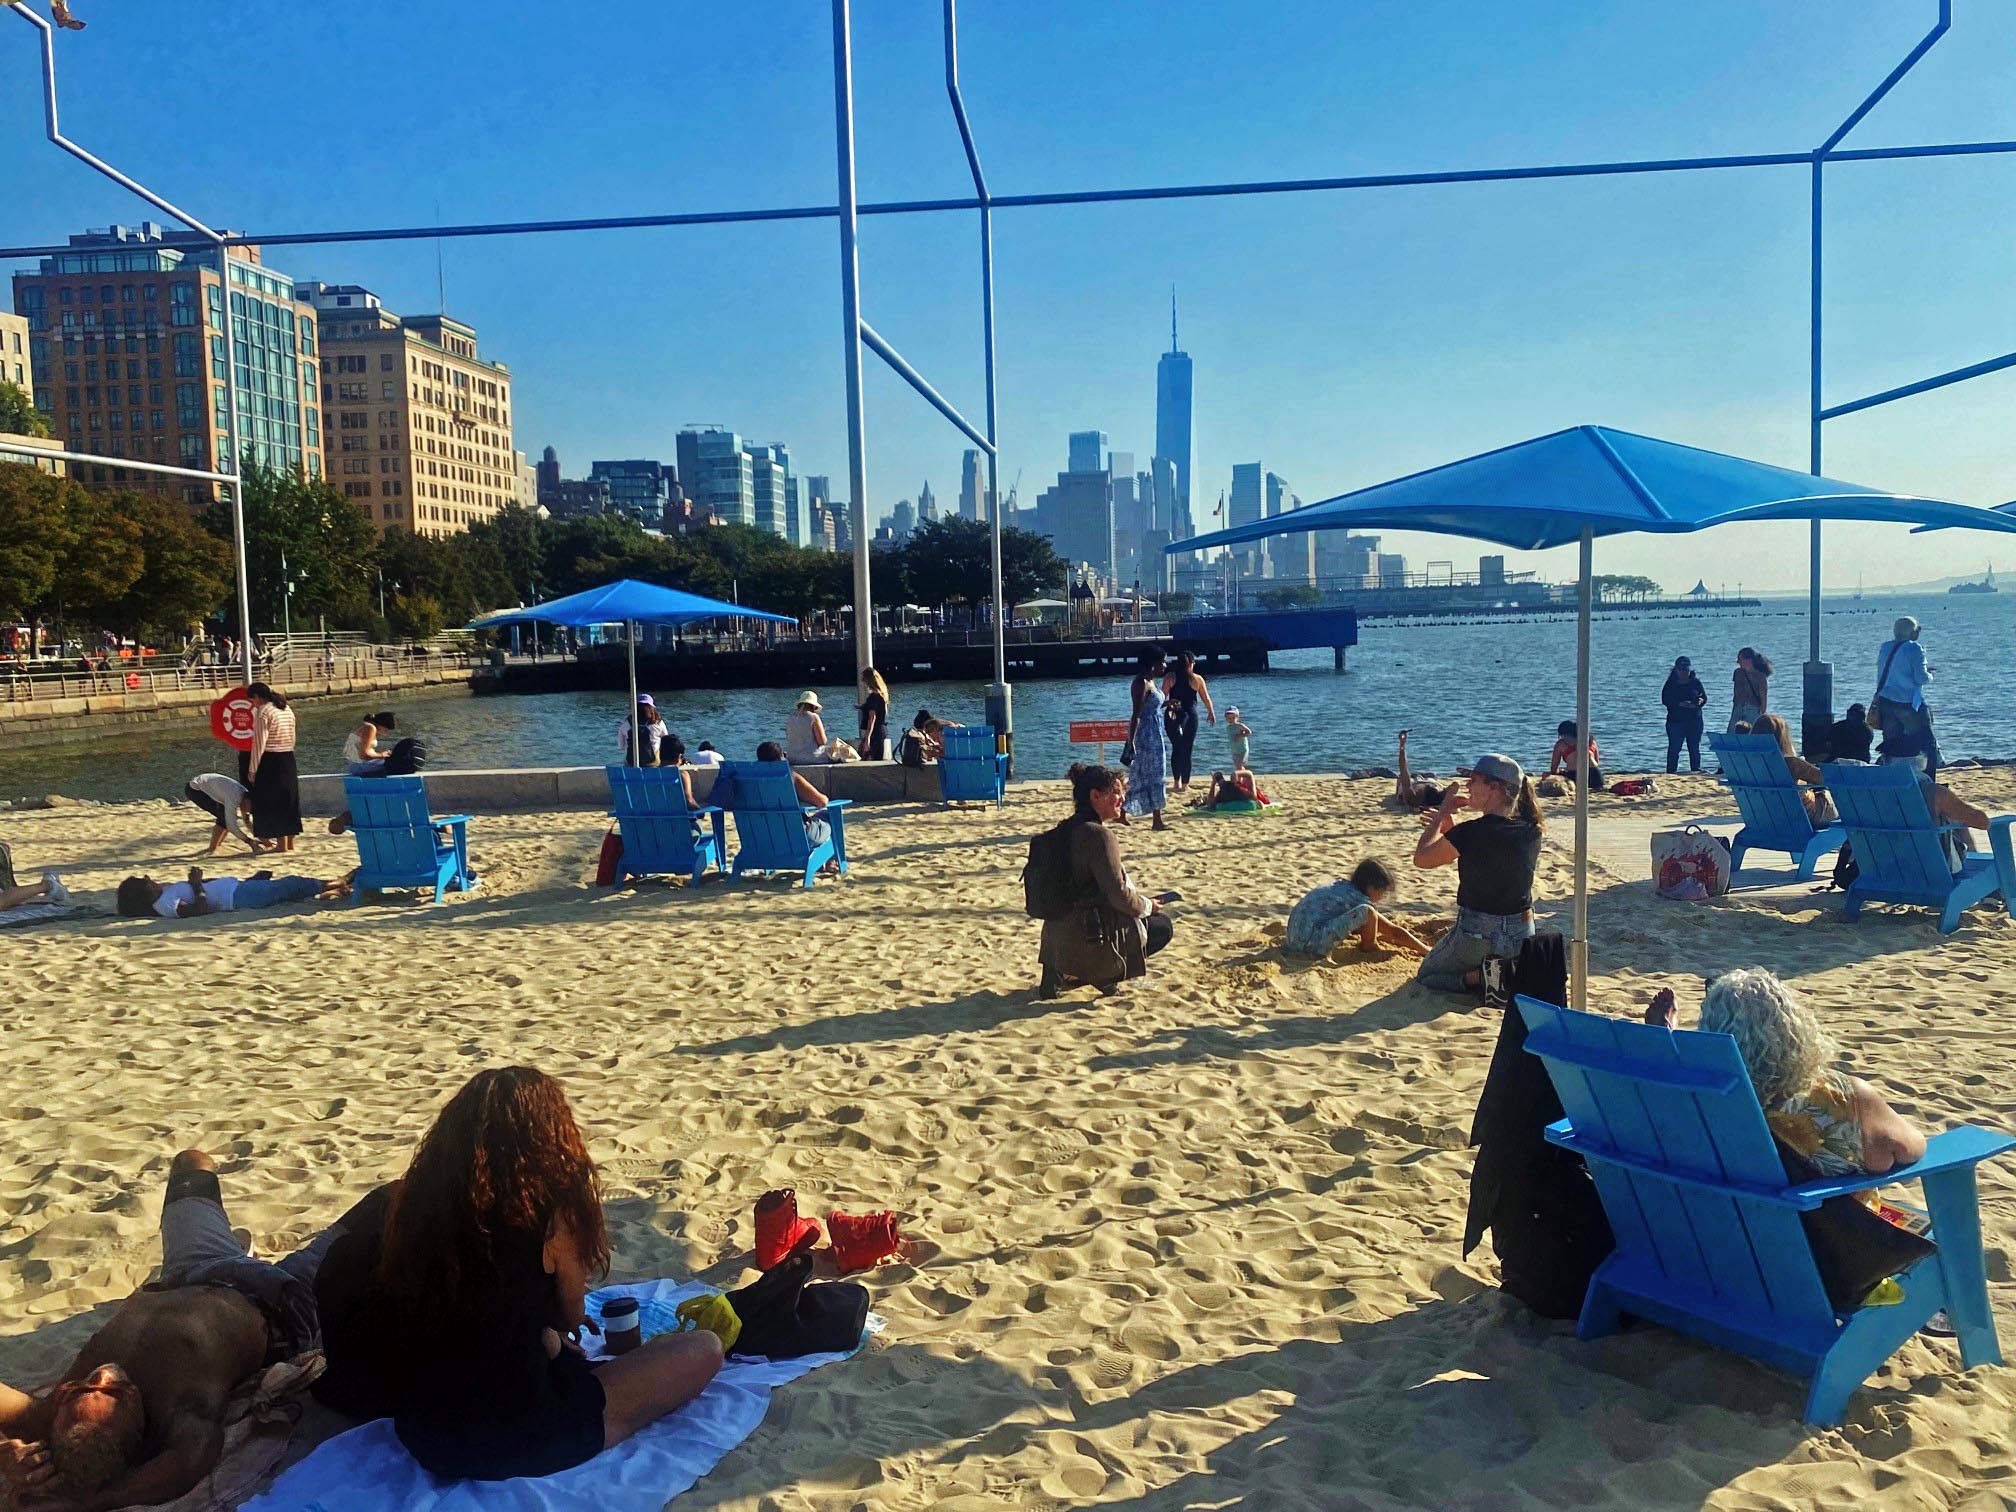 People sitting and lounging on the beach at Gansevoort Peninsula.